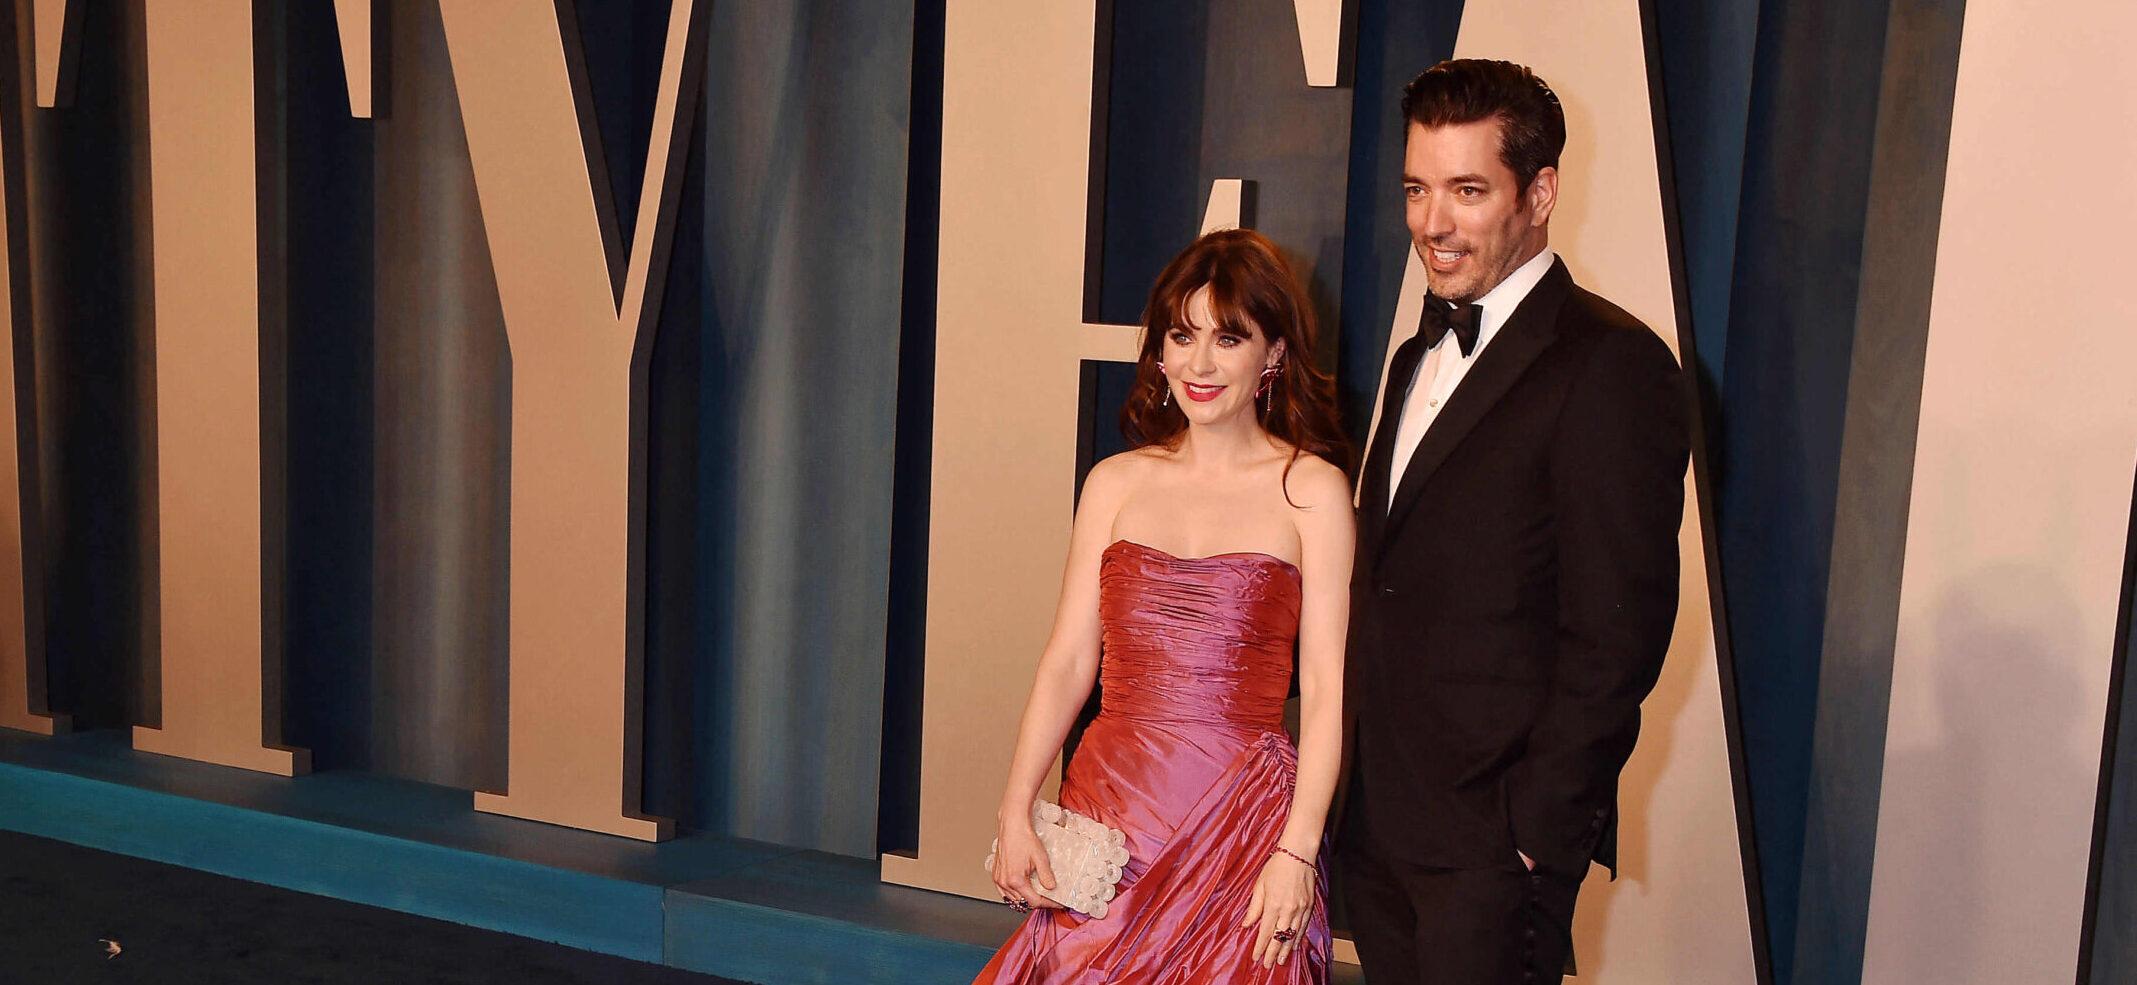 Zooey Deschanel Flaunts Unique Engagement Ring From Jonathan Scott: ‘Forever Starts Now’